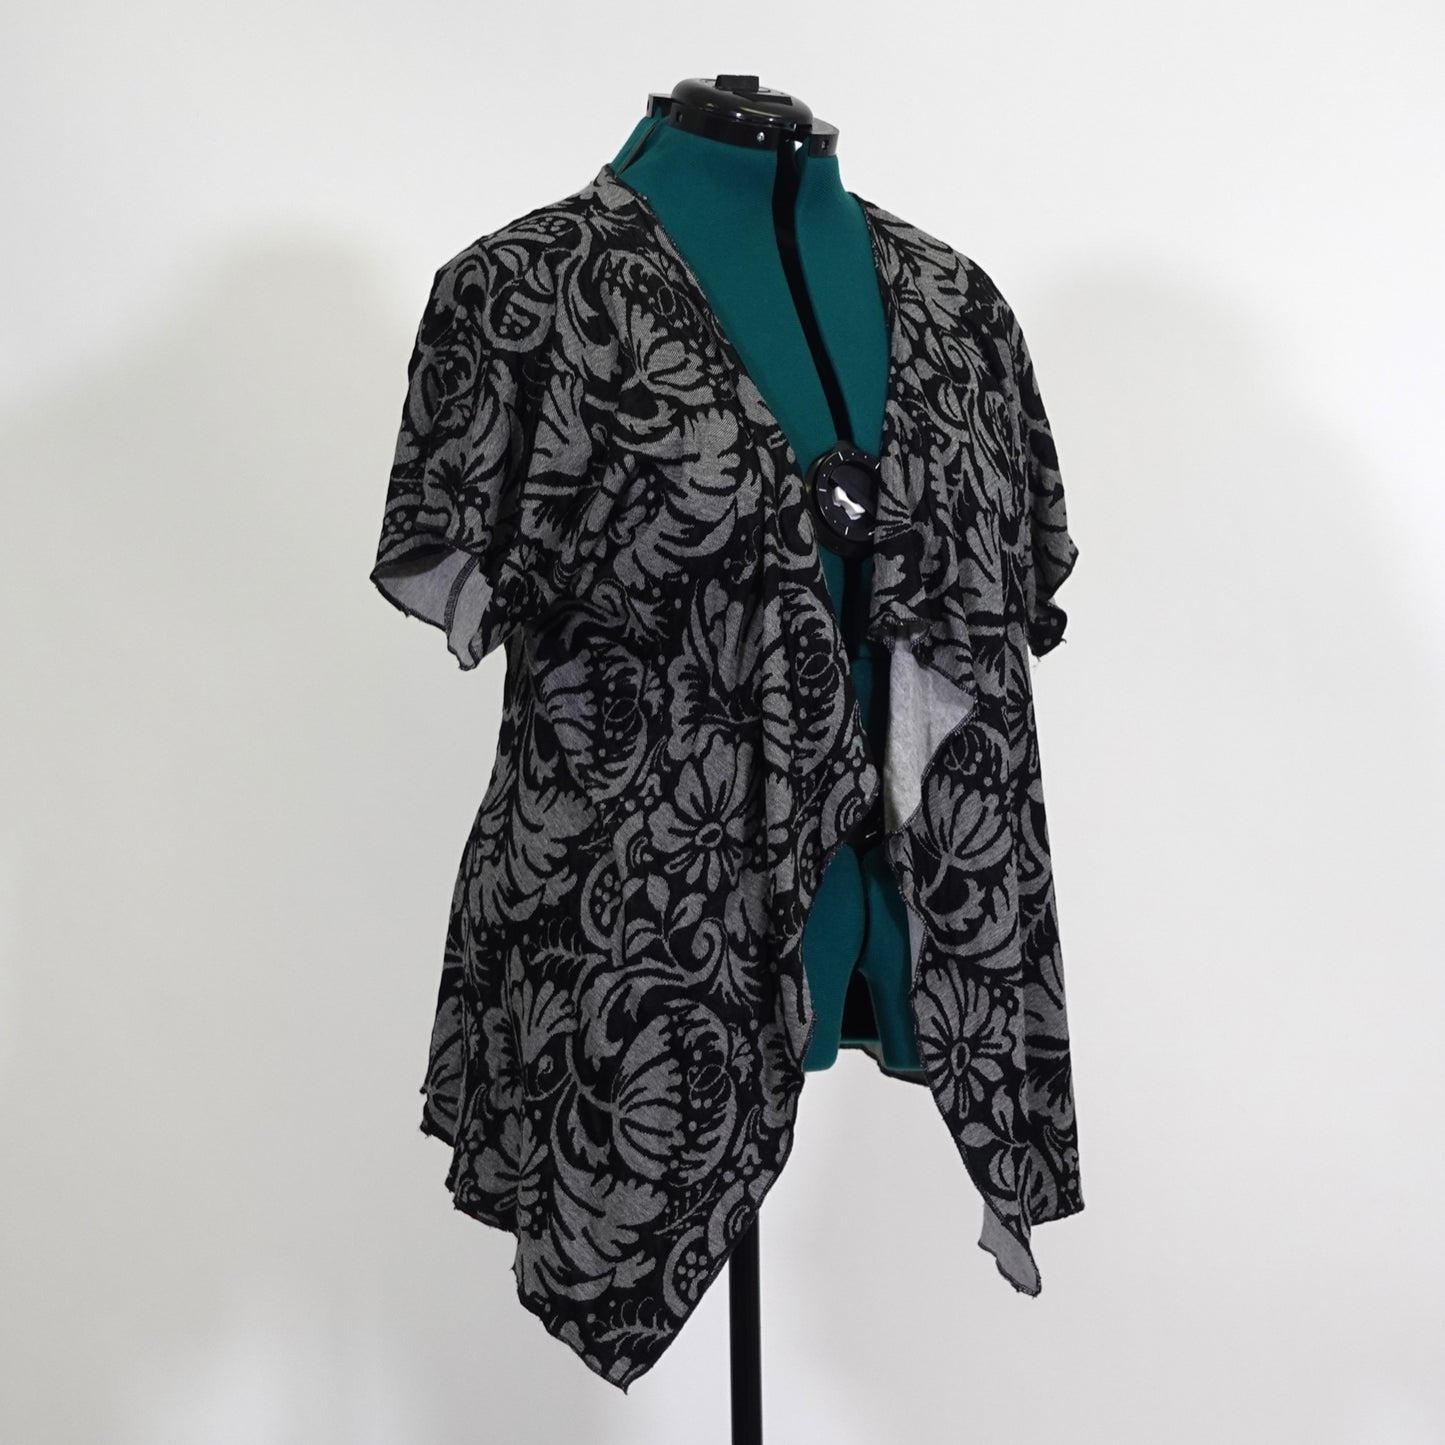 Black and Gray Paisley Print Open-Front Short Sleeve Cardigan